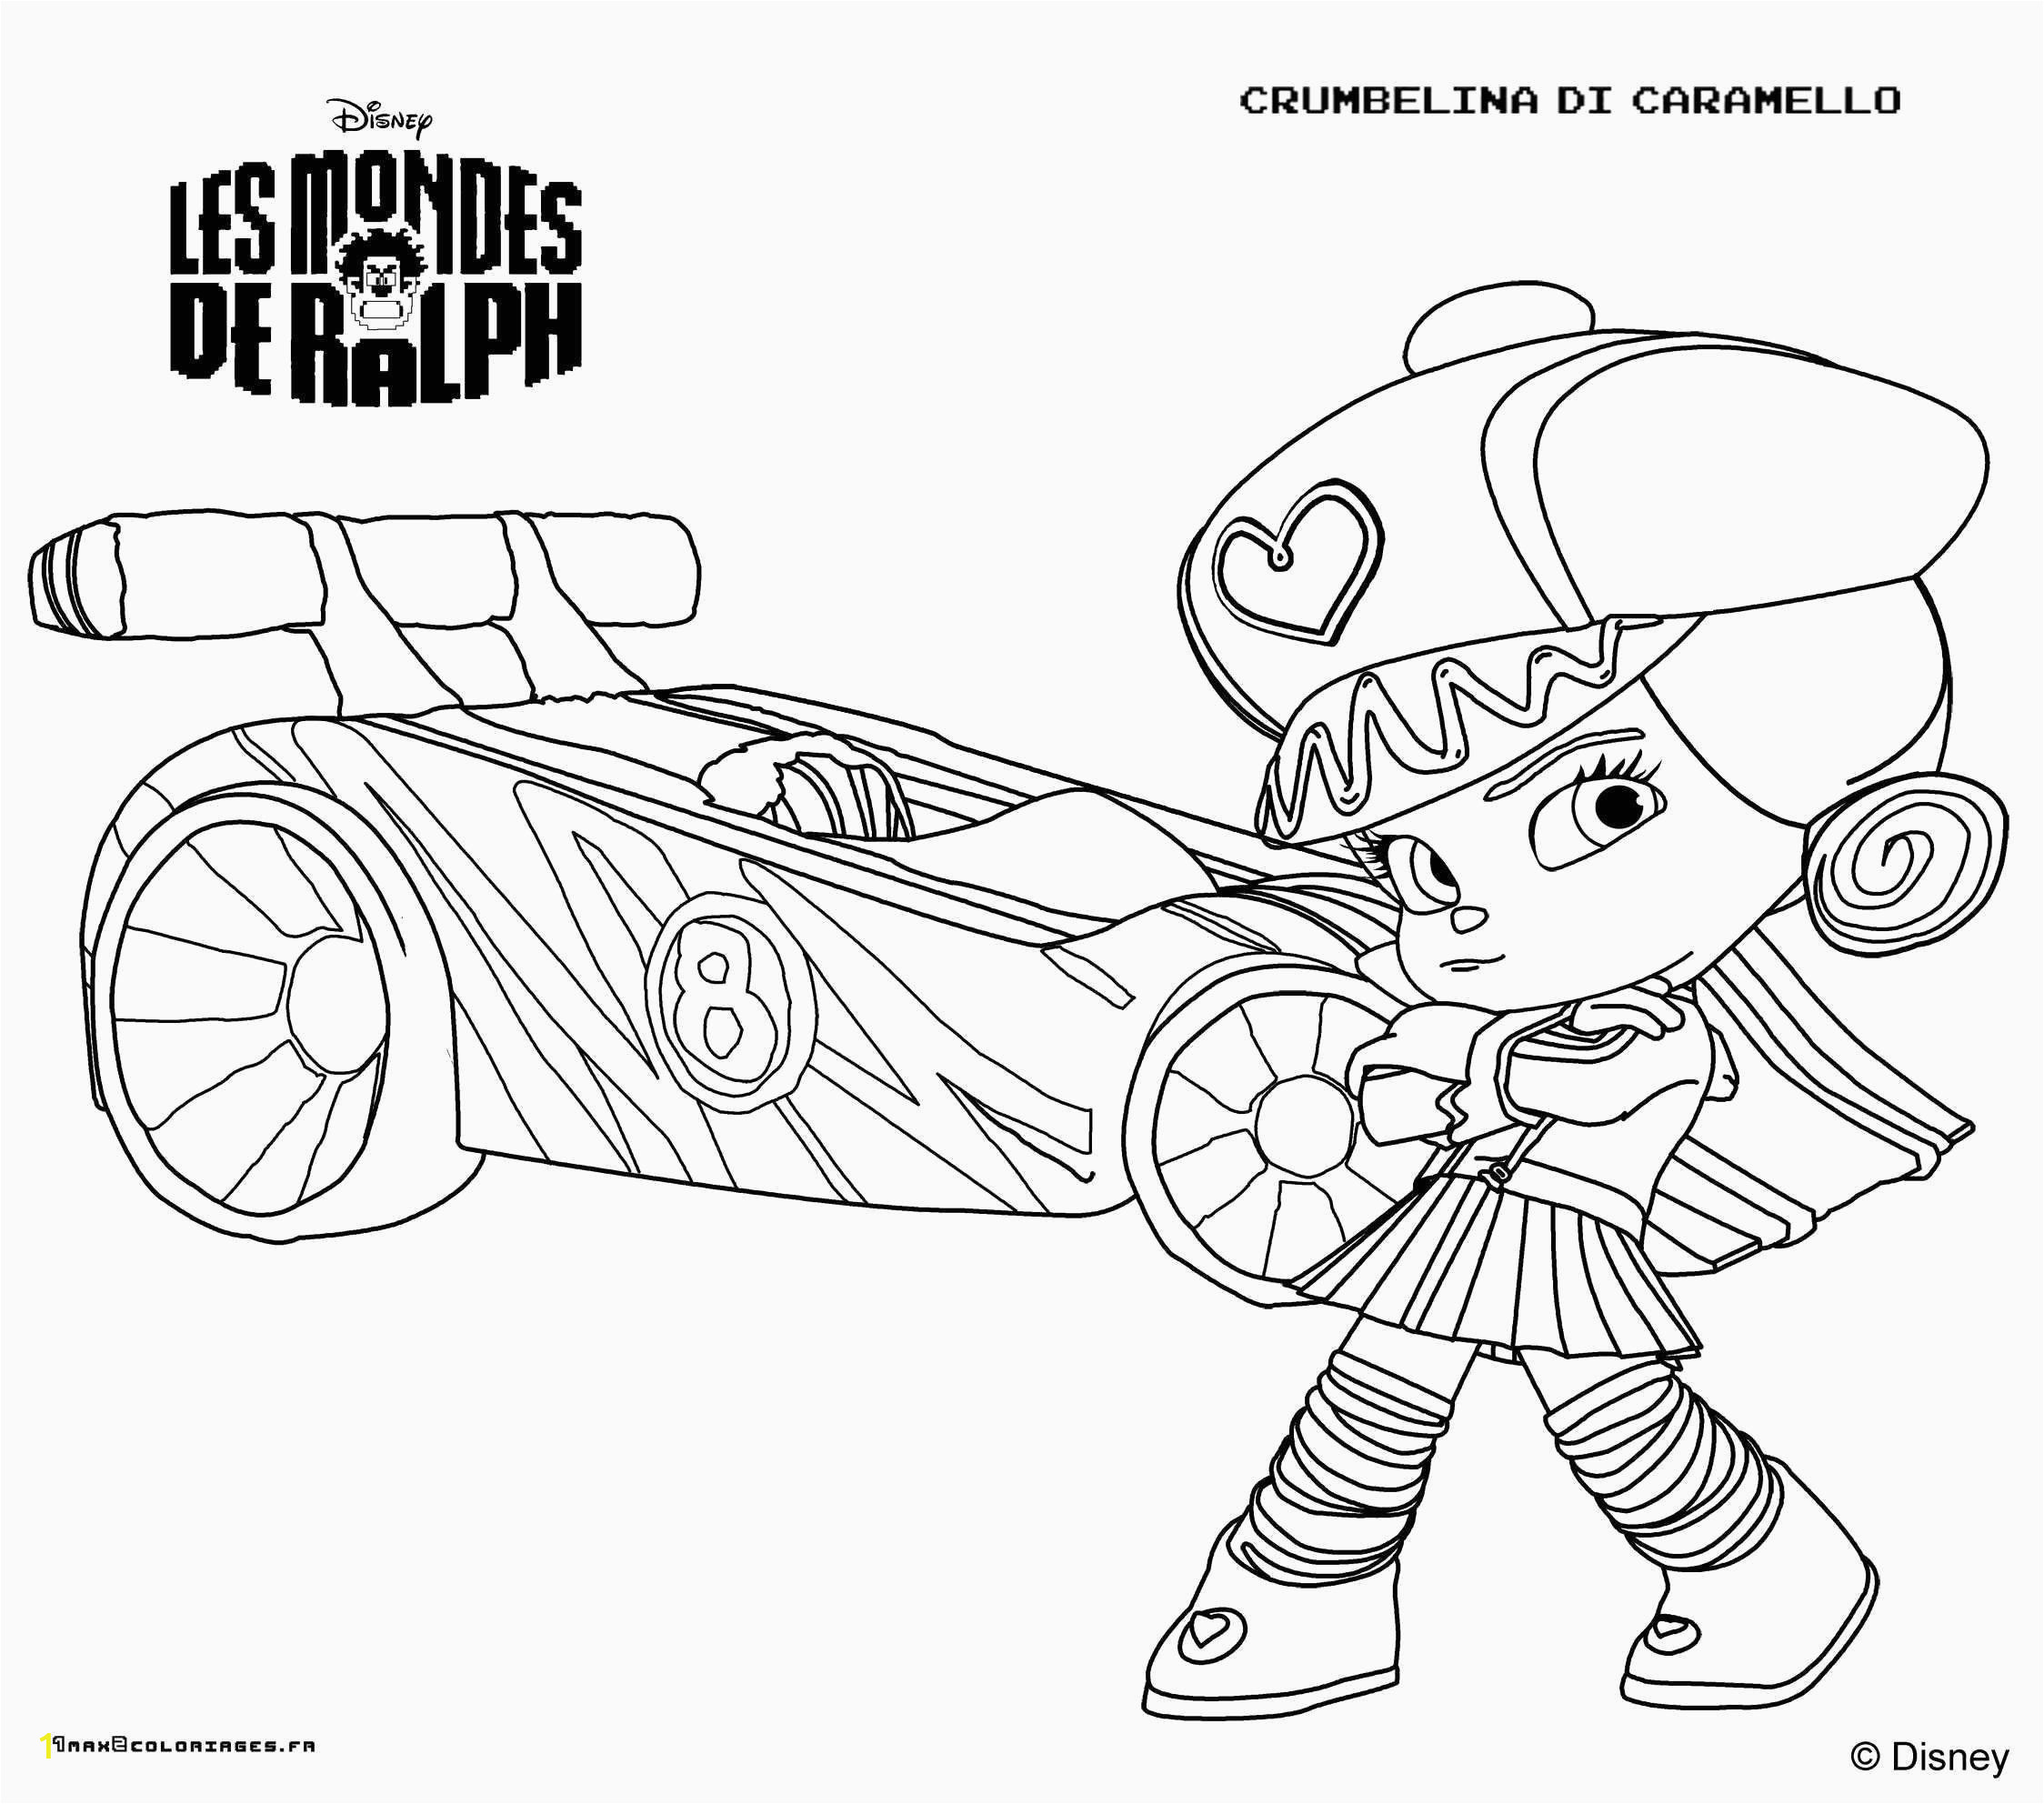 Disney Princess Jasmine Coloring Pages Pin On Popular Cartoon Coloring Pages